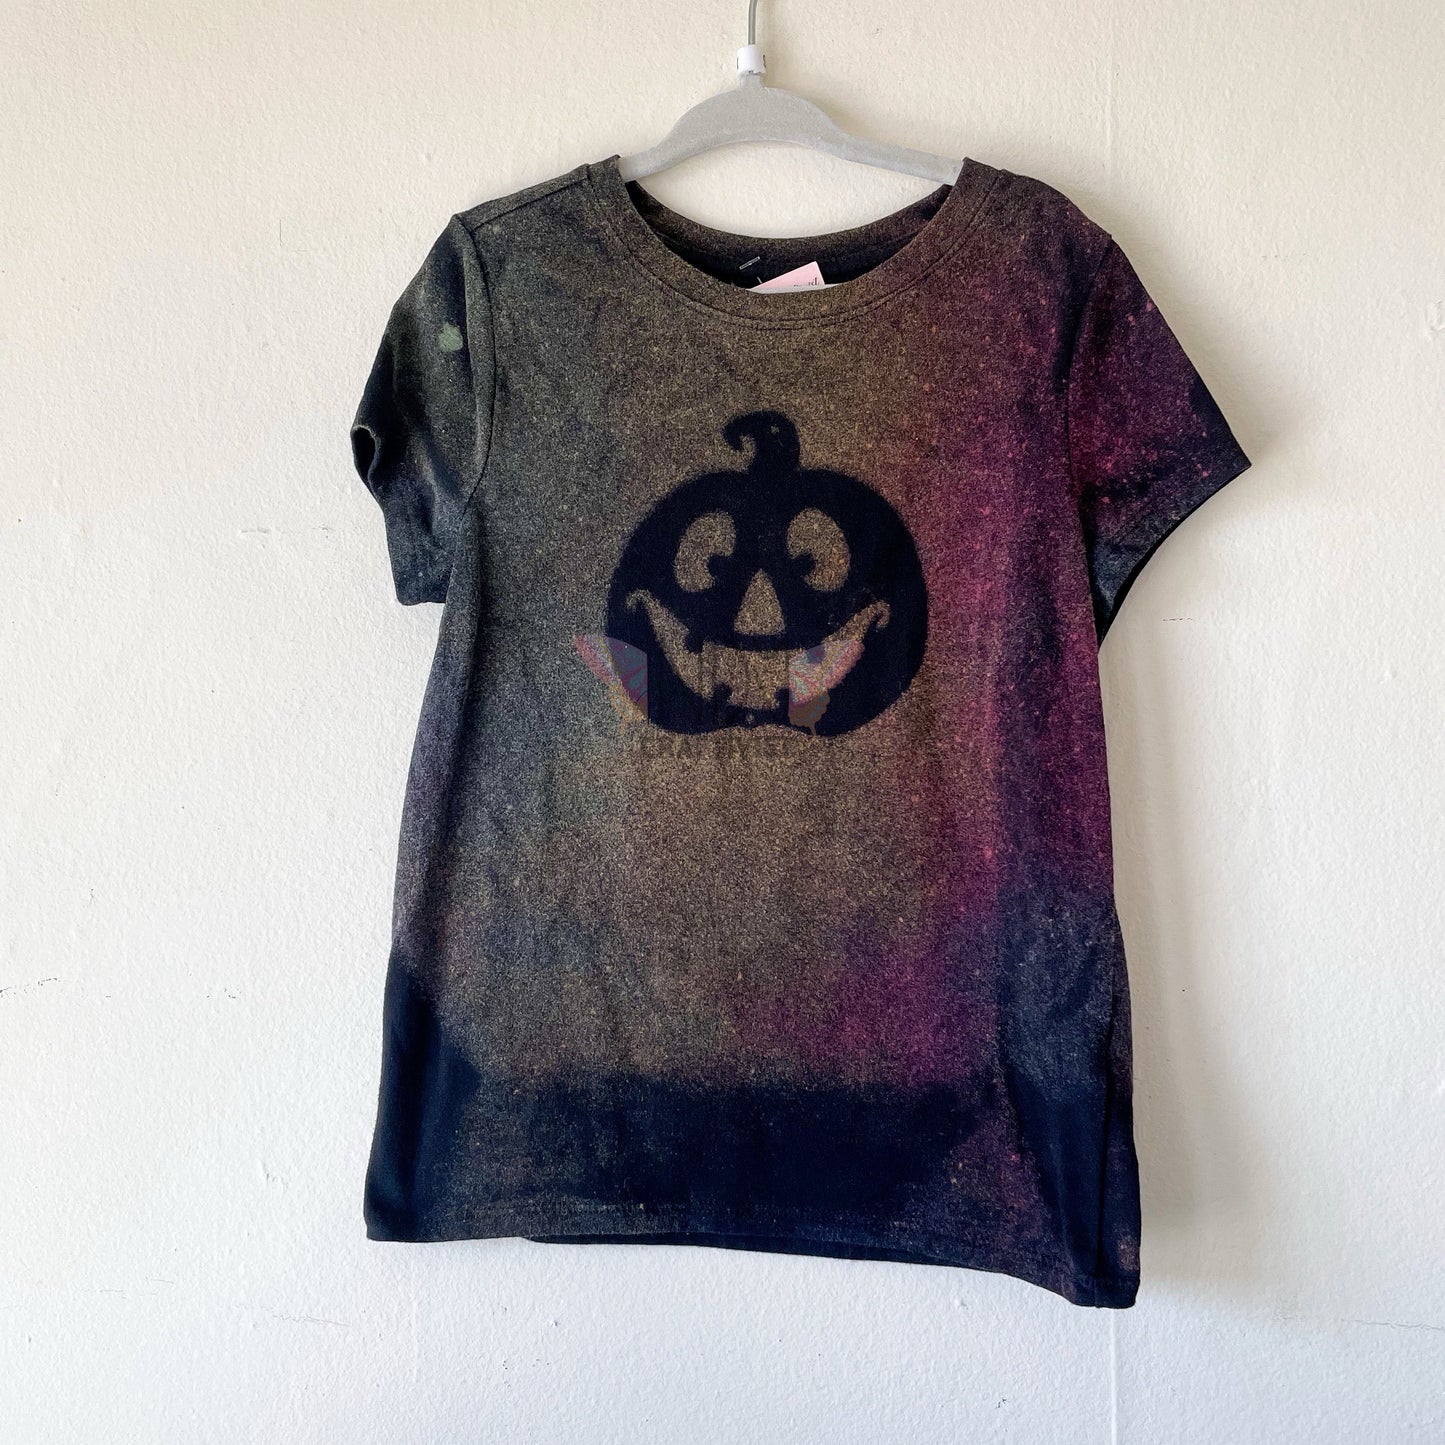 4T Tie Dyed T-shirt